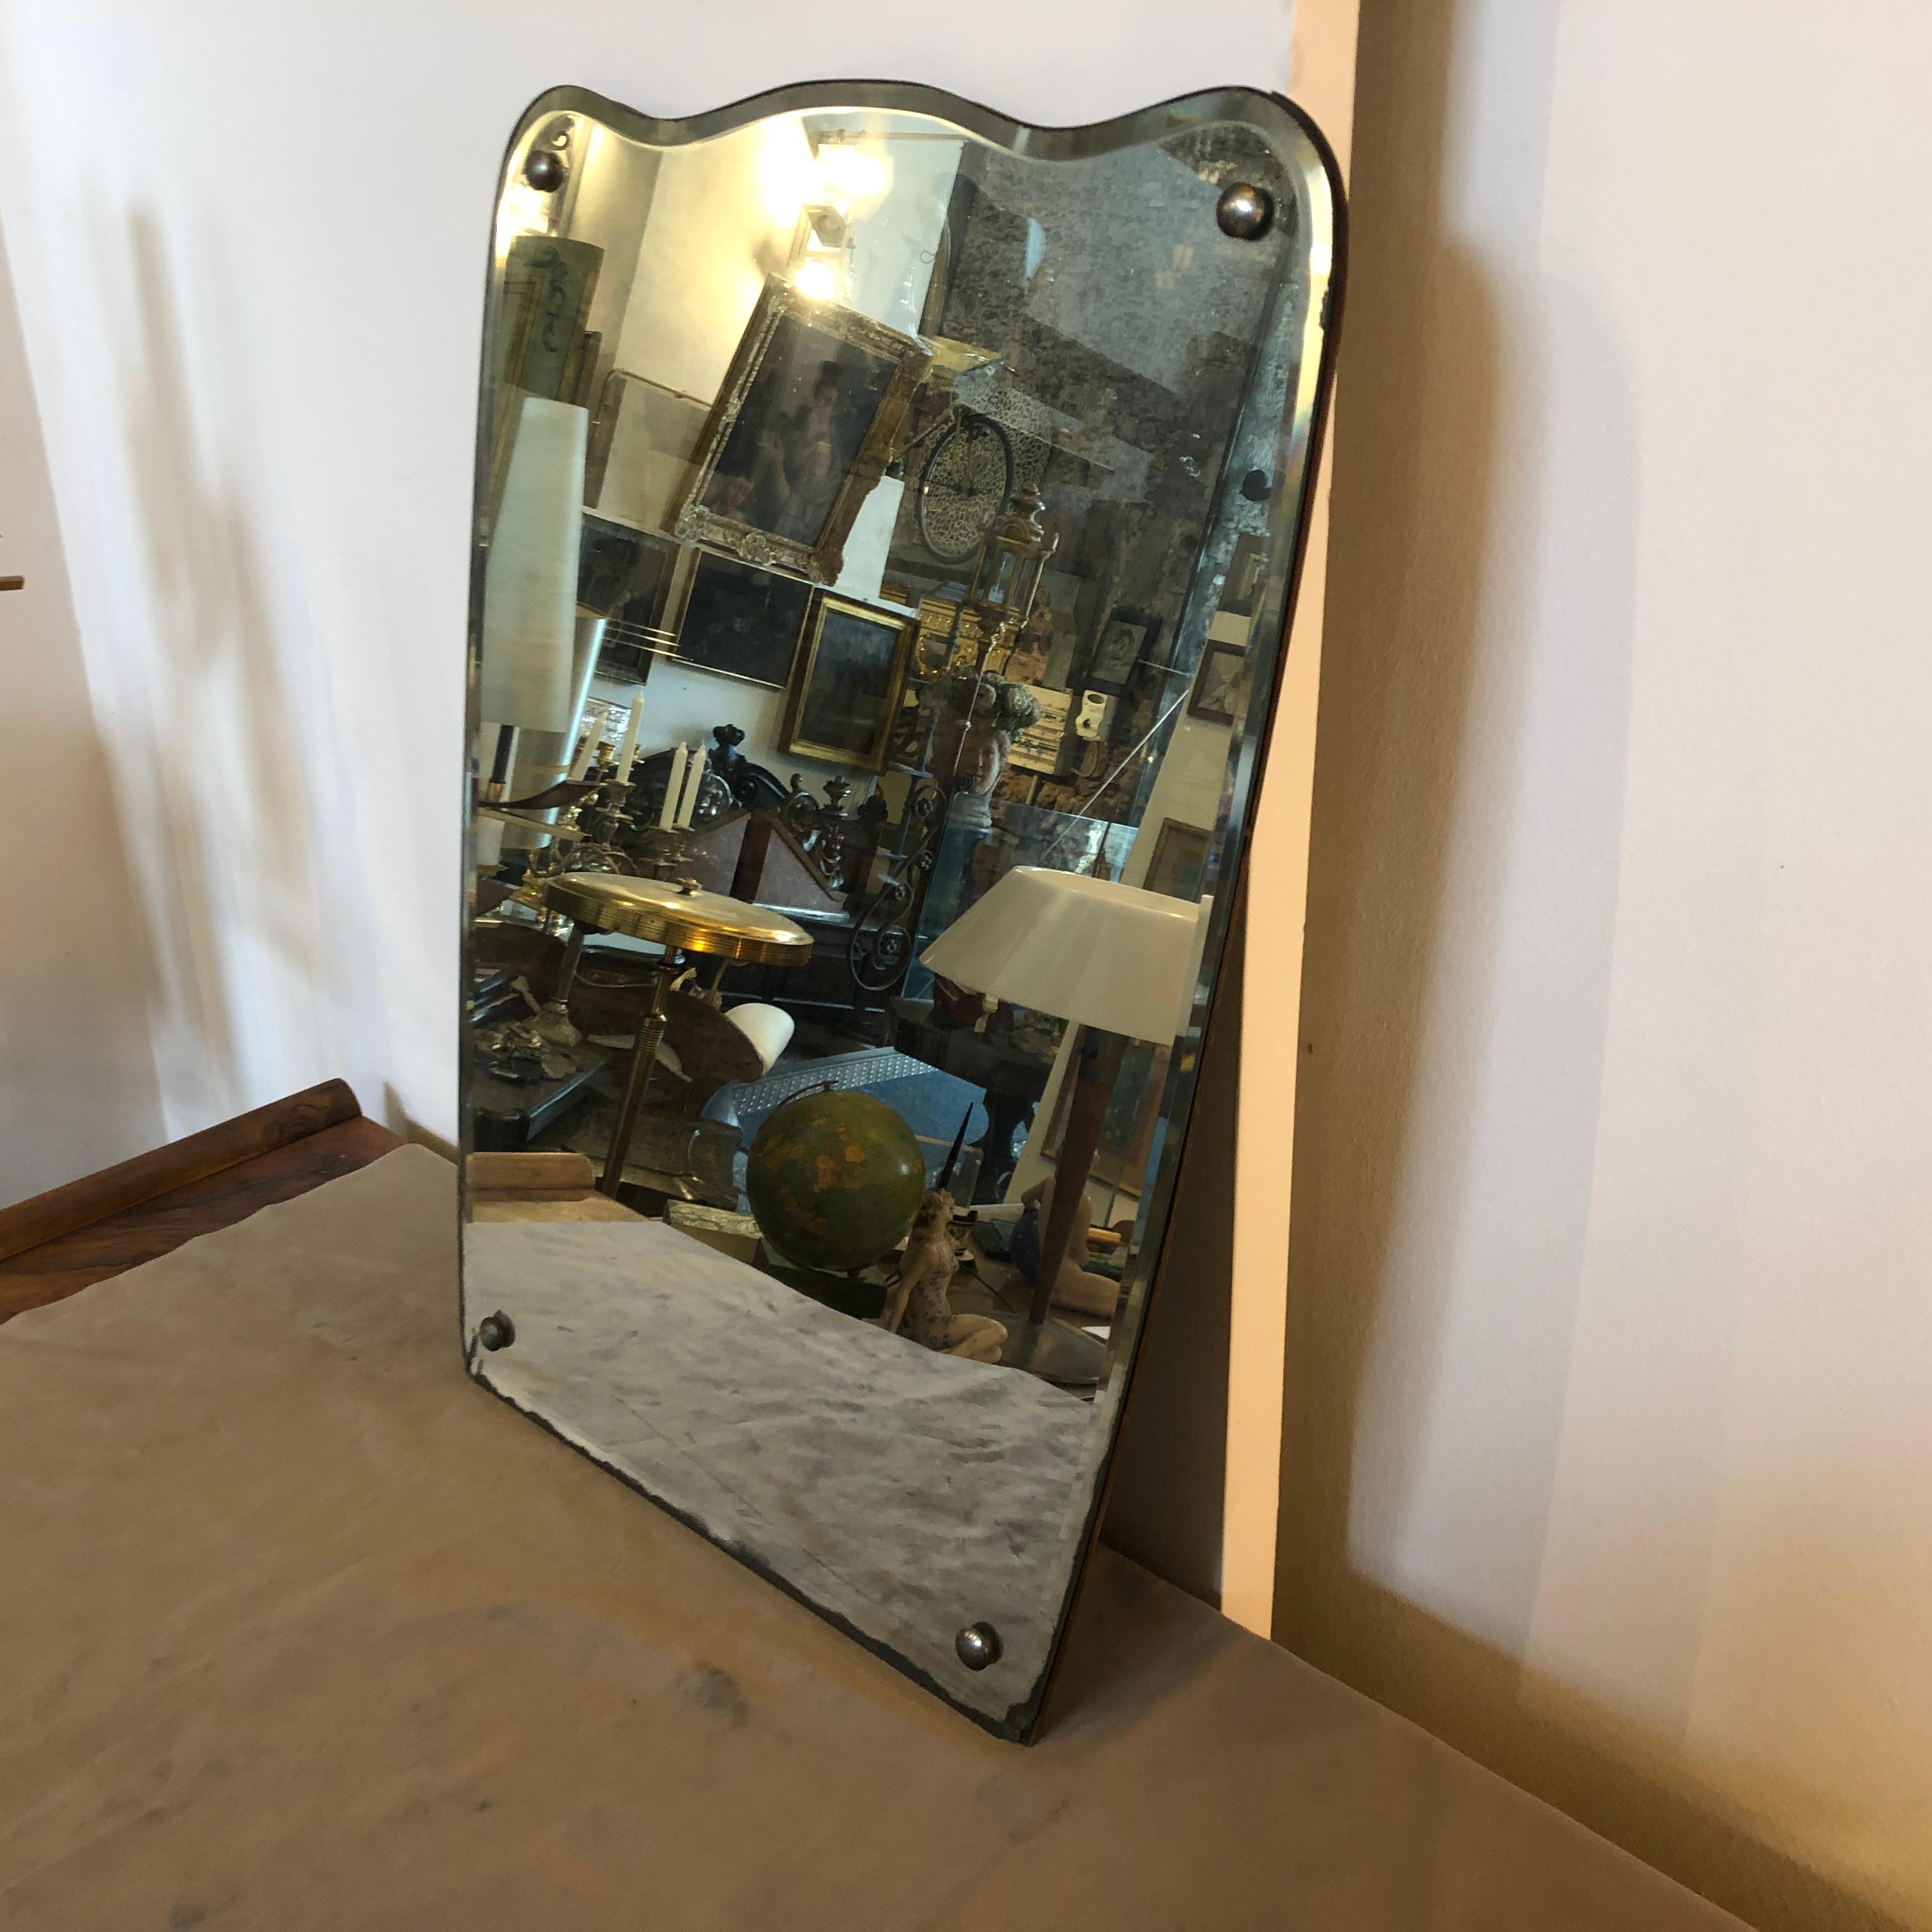 Stylish Mid-Century Modern wall mirror, good conditions overall, it has real signs of the age on the mirrored glass. It's labeled Lugi Fortuna on the backside. The first photo is retouched by 1stdibs, please look all others photos where you can see